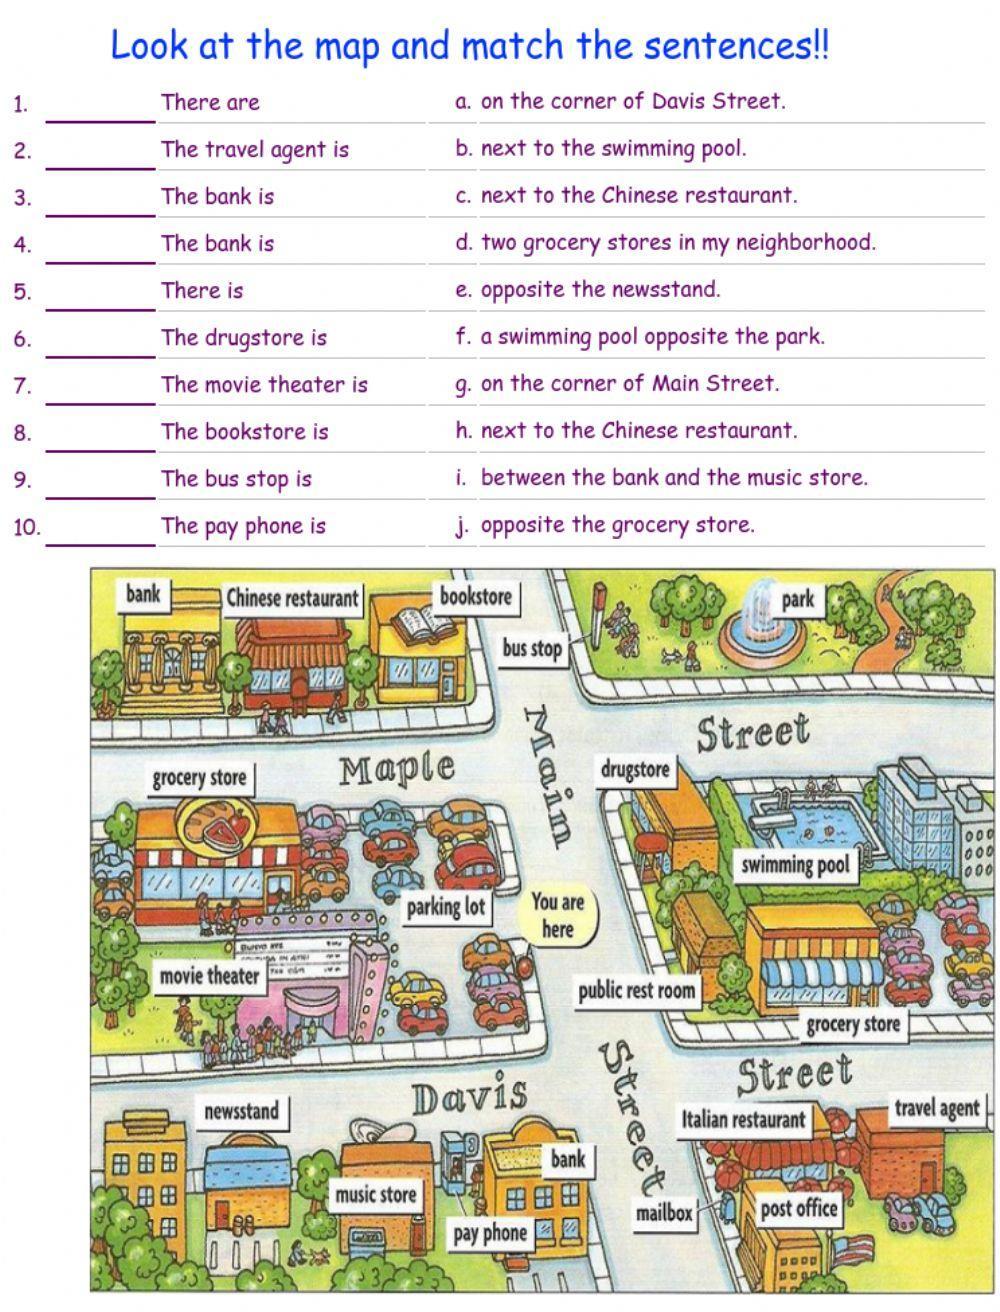 Look at the map and match the sentences